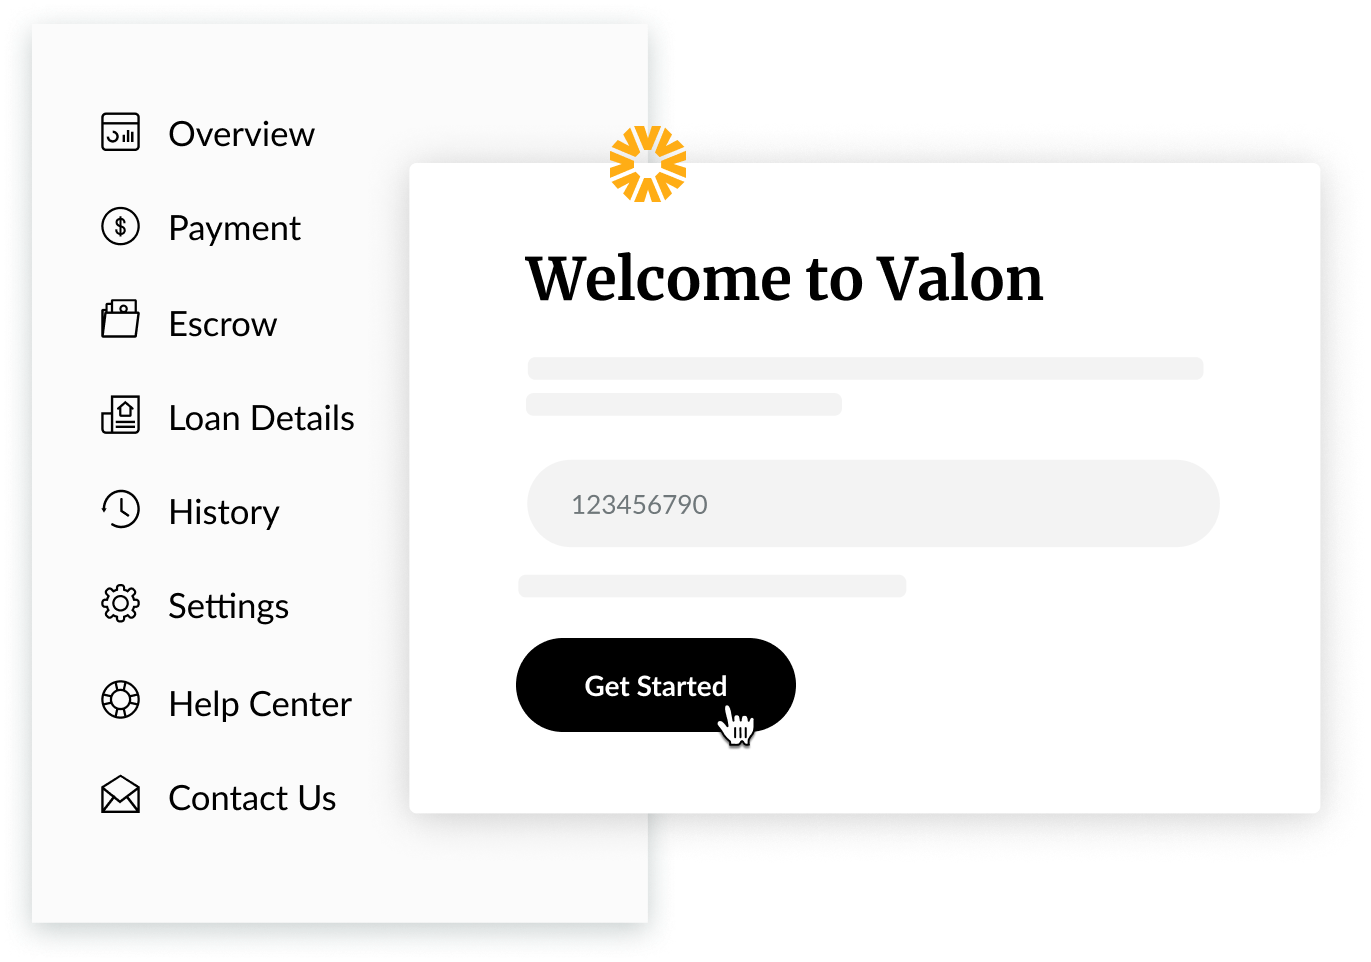 Collage of the homeowner dashboard navigation bar options, below a card that says "Welcome to Valon" and "Get Started".